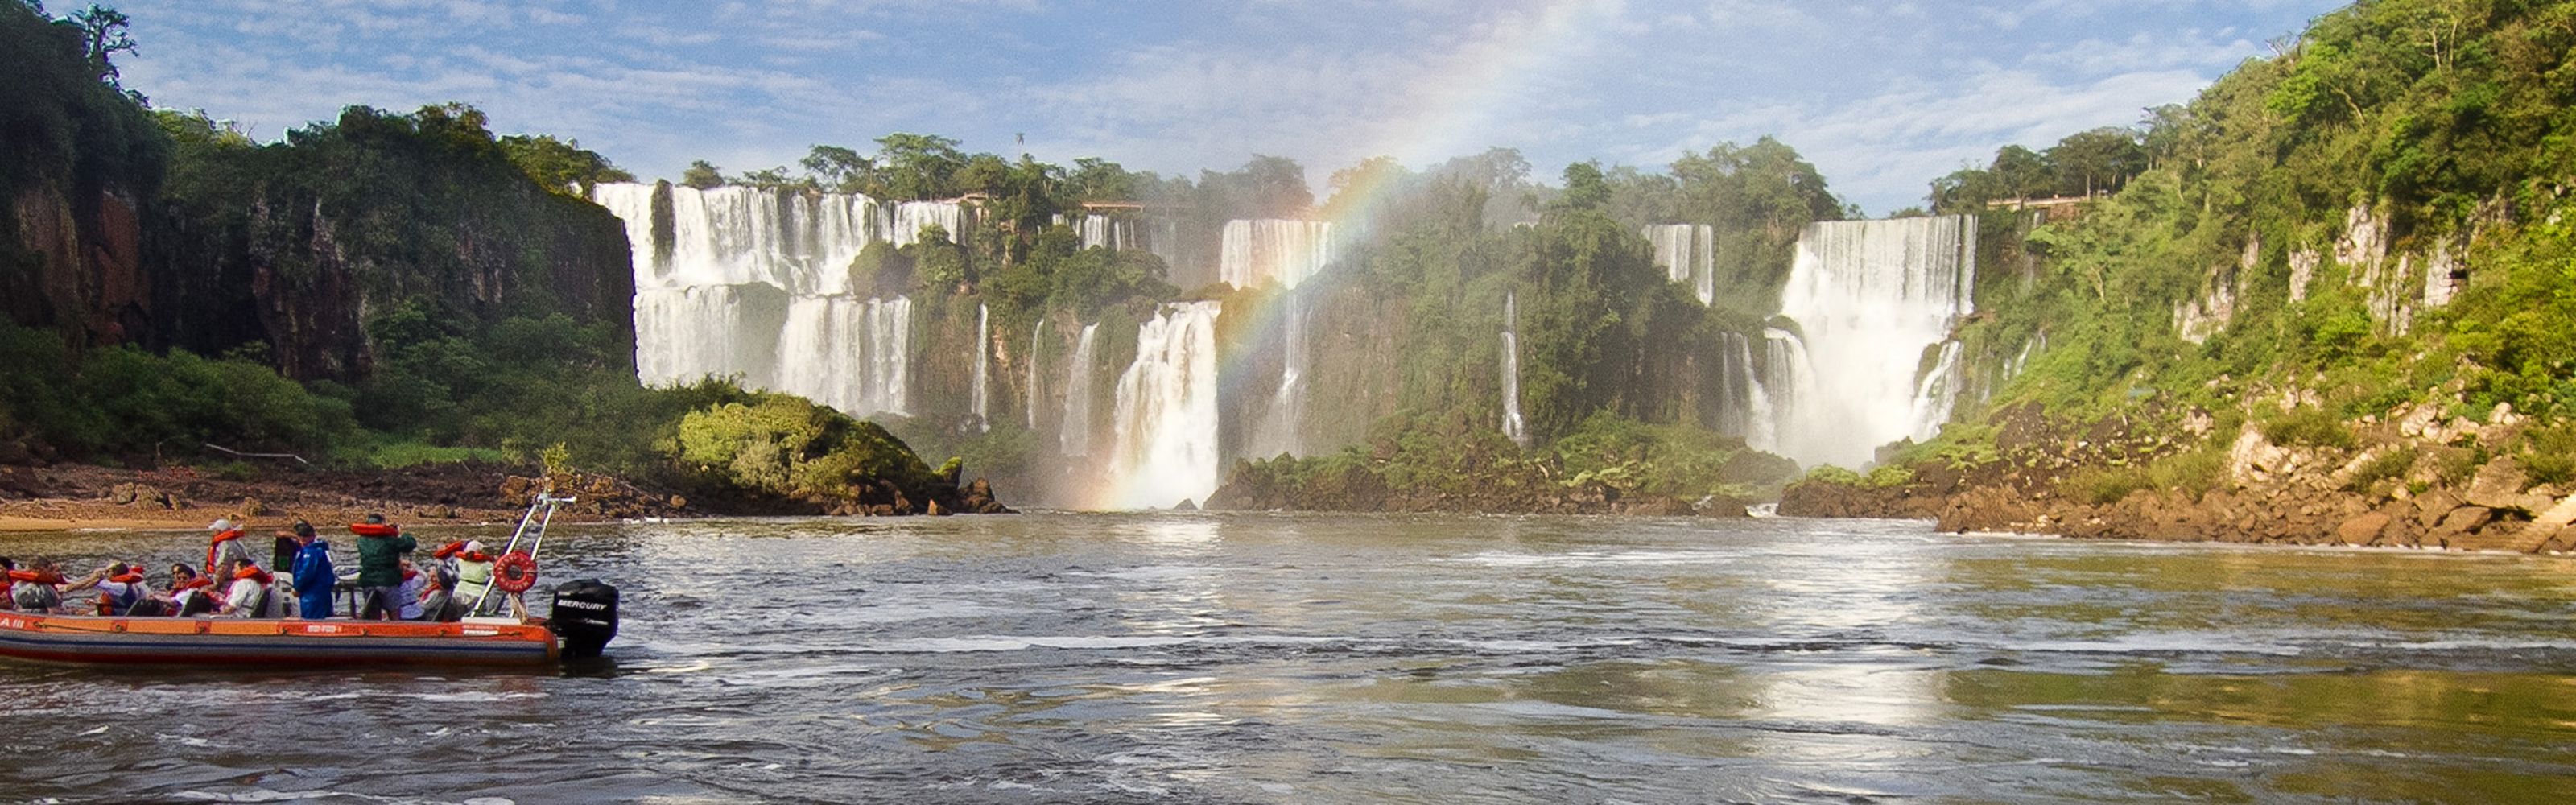 Tourists sit in a red motor boat at the based of Iguaçu